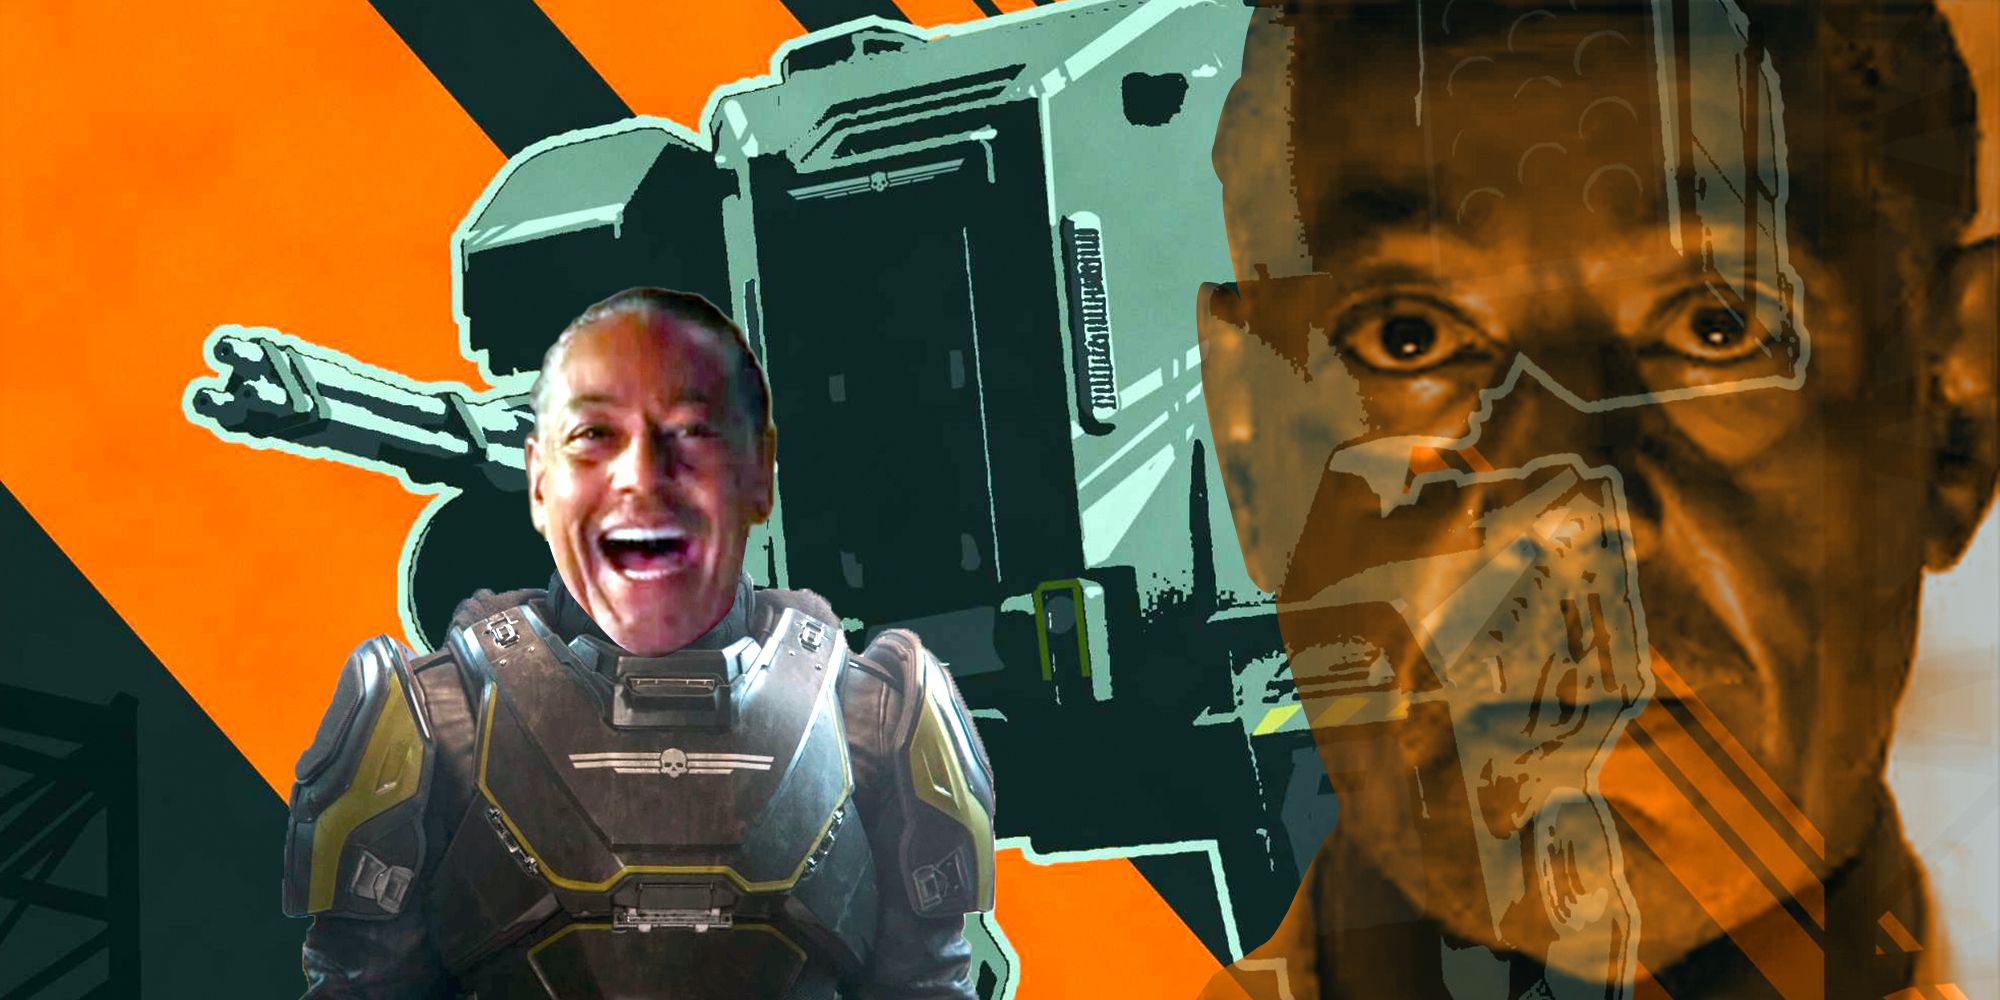 Giancarlo Esposito laughs in a Helldiver suit in front of a mech. On the right, Esposito's head staring solemnly into the camera is overlaid on the image.